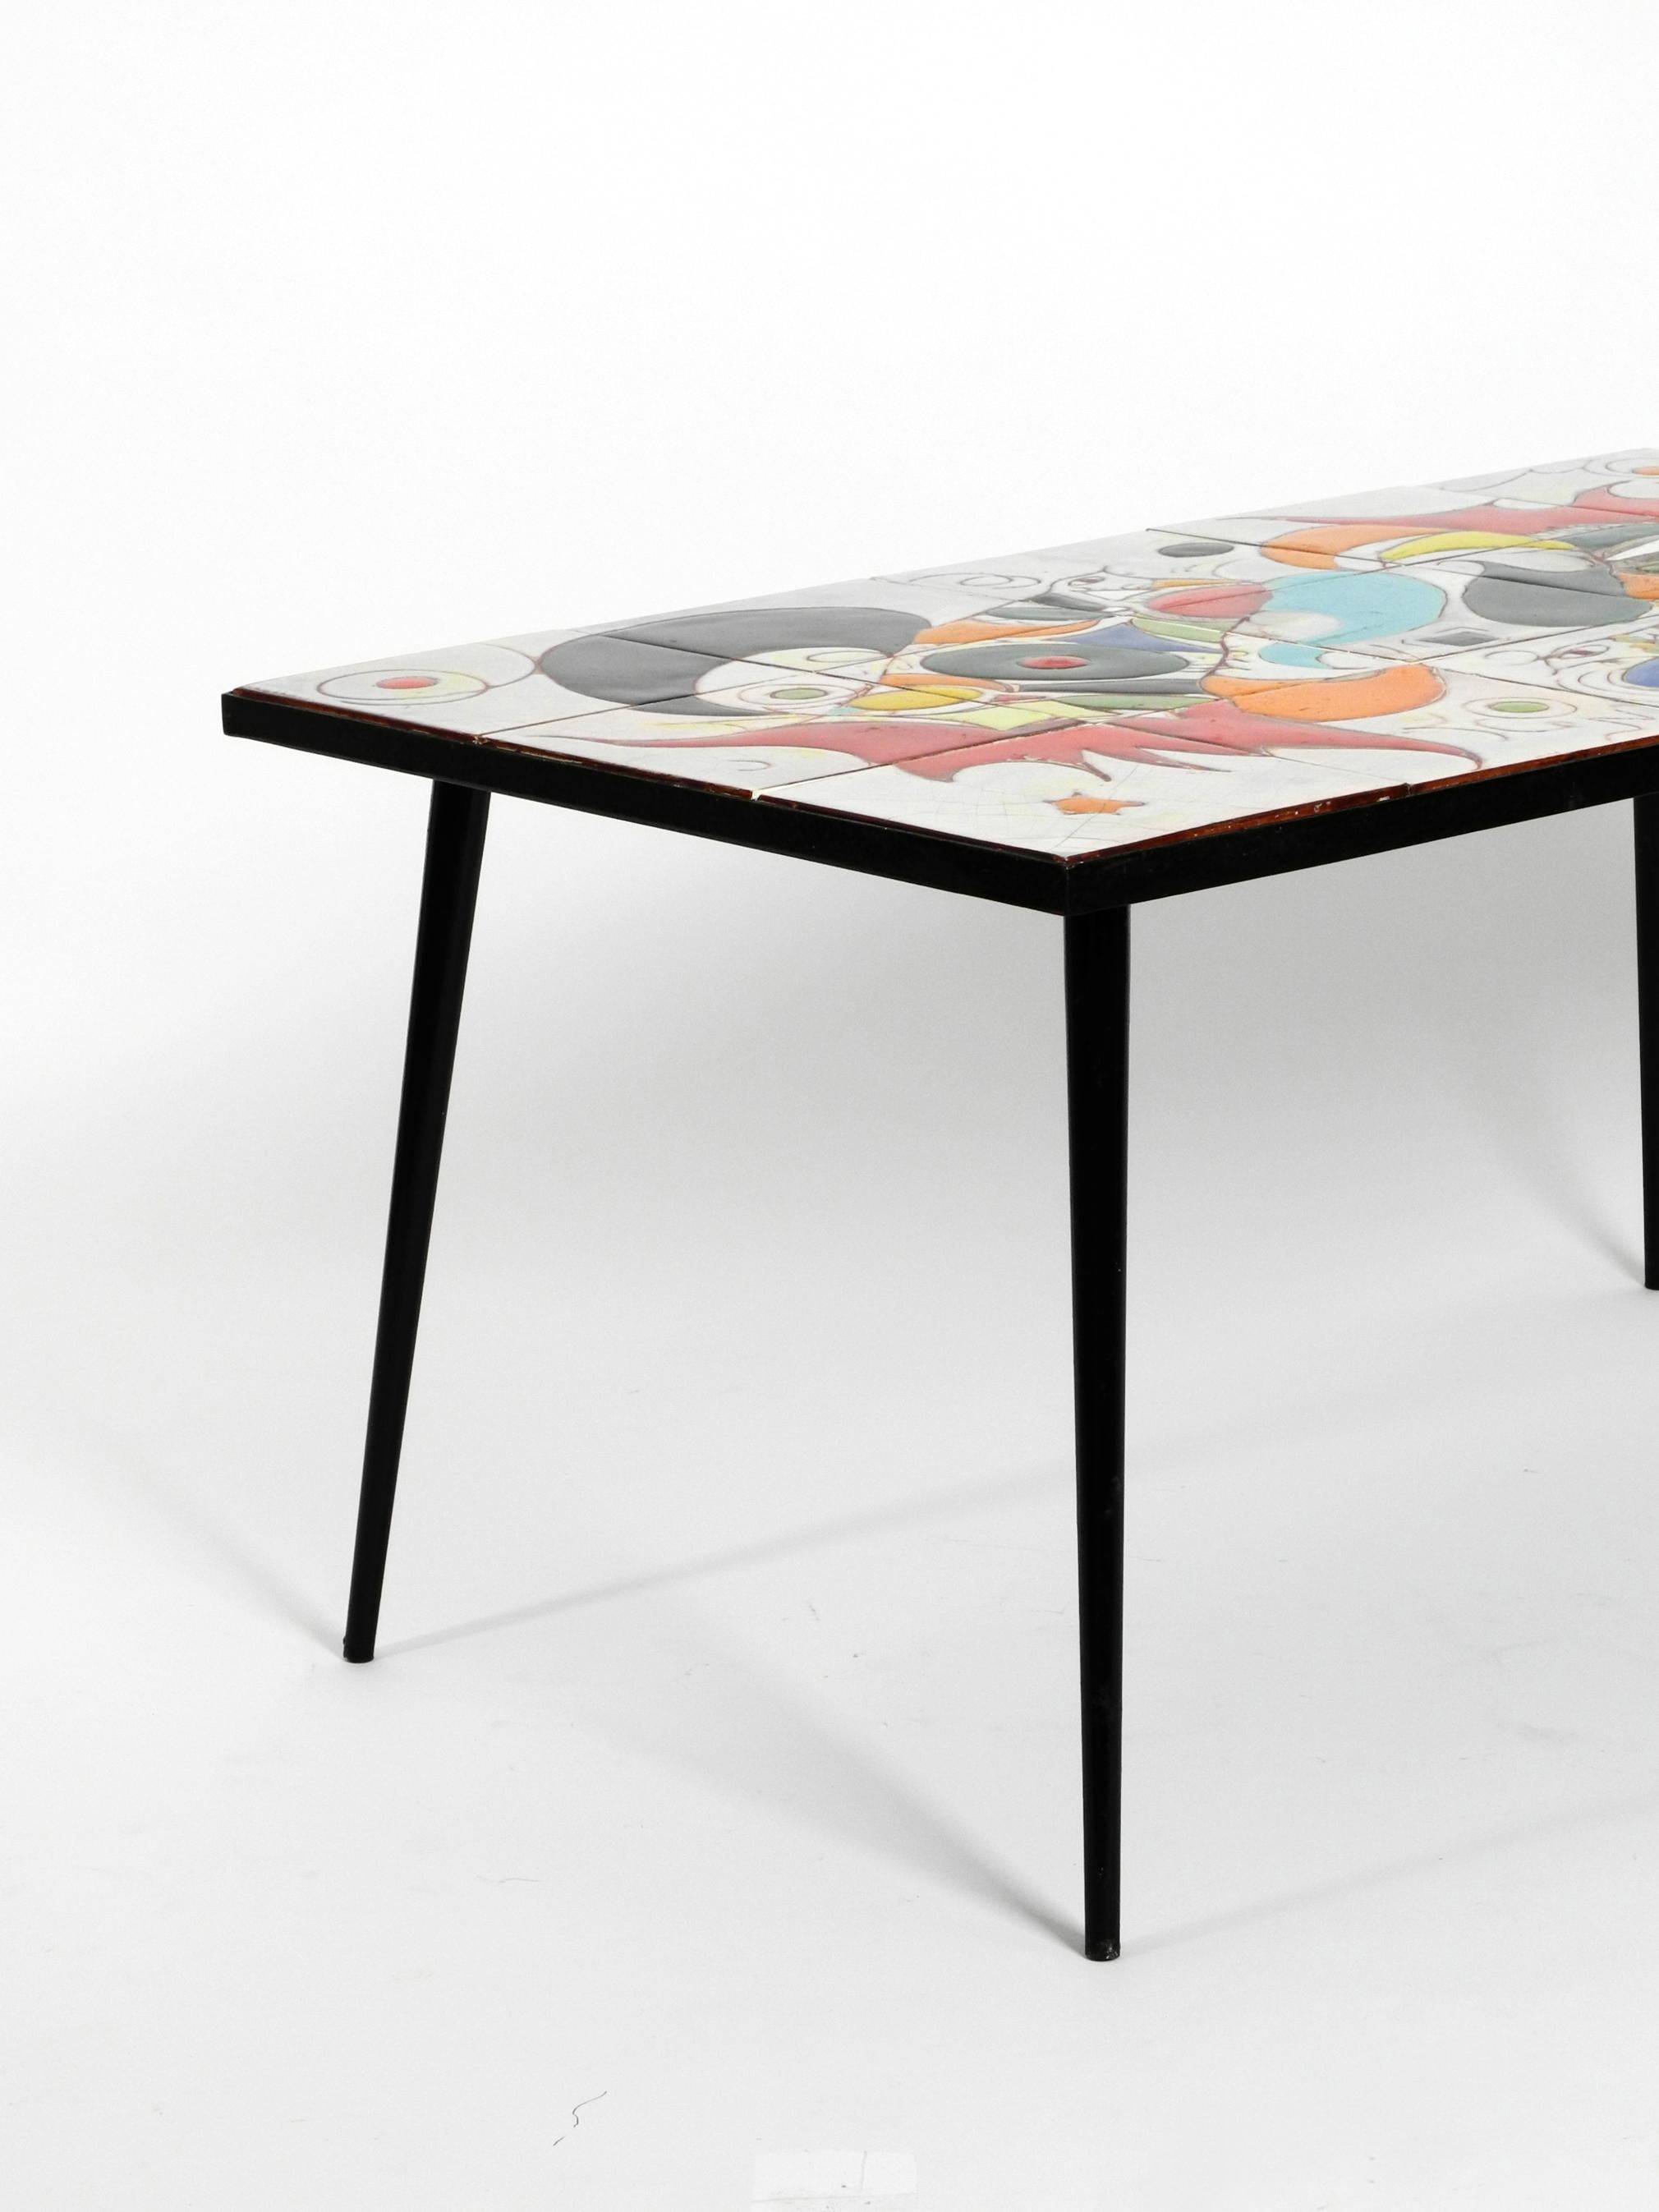 Mid-20th Century Midcentury Italian Modern Iron Table with Tiled Top and Abstract Motif For Sale